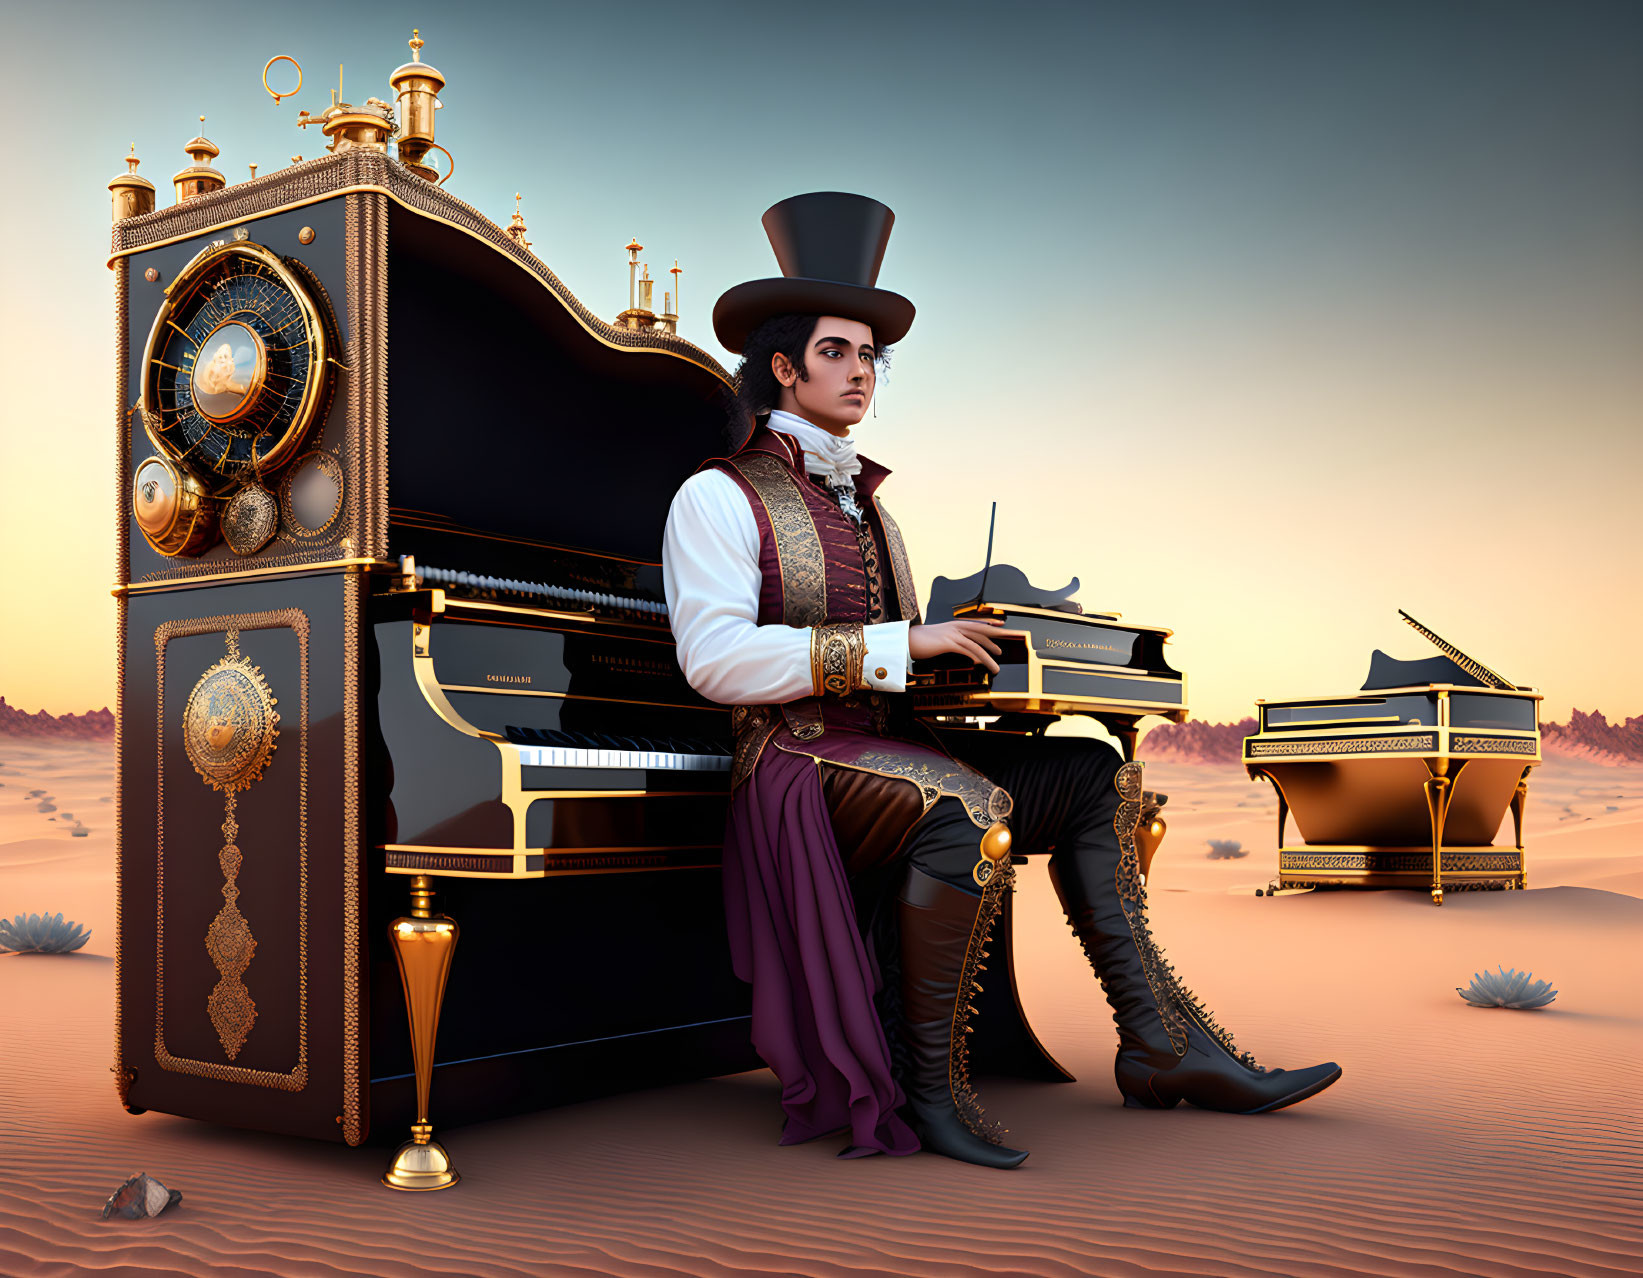 Steampunk-themed illustration of man playing piano in desert with gears.